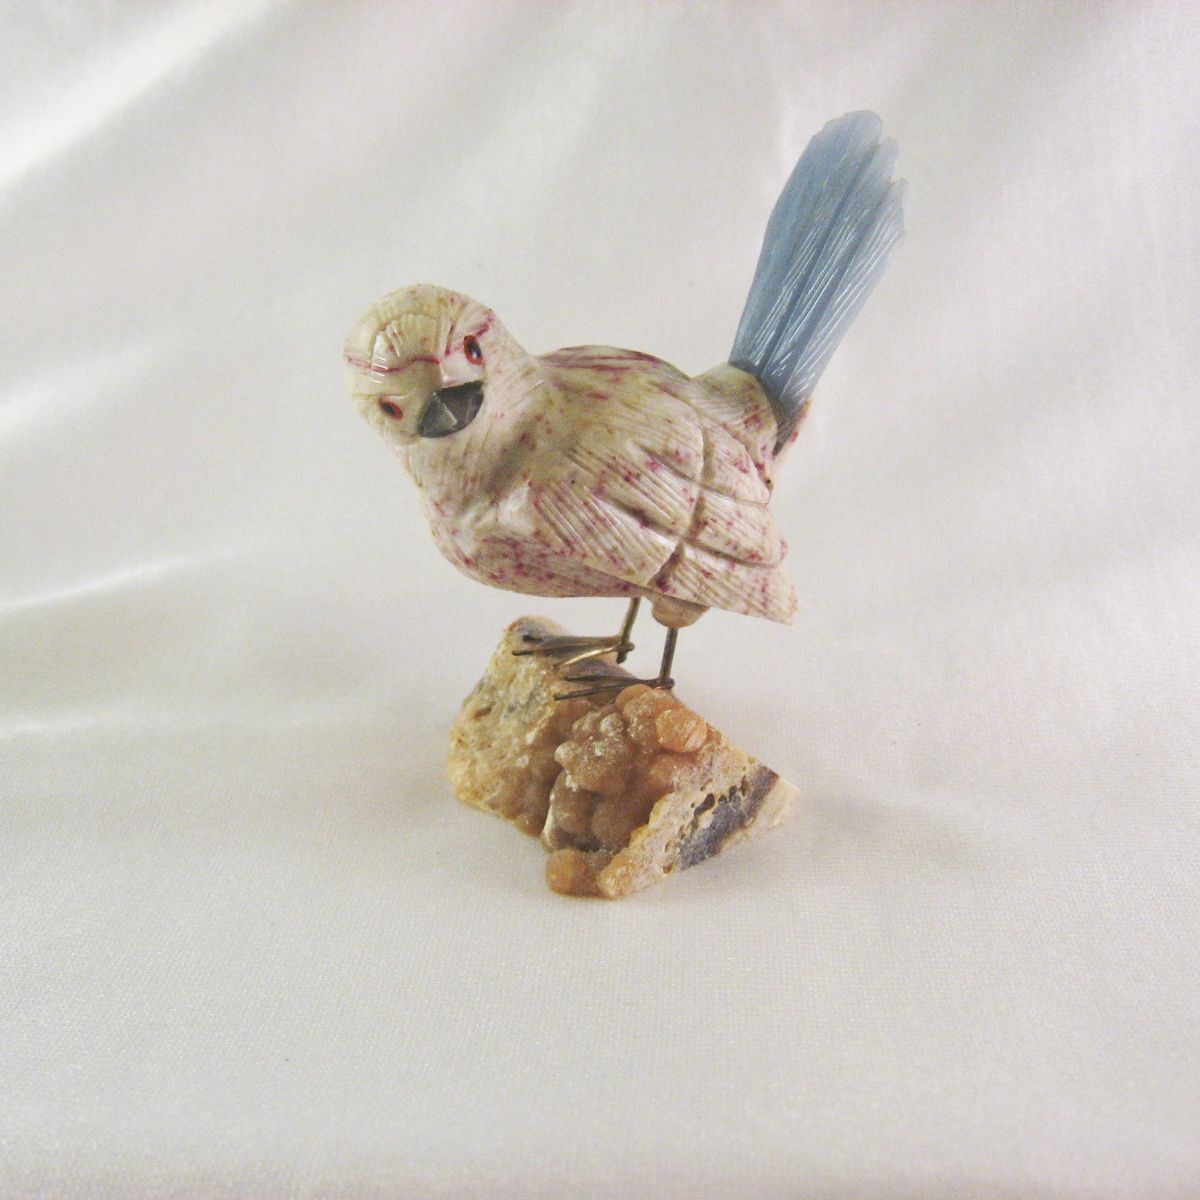 Primary image for Carved Stone Bird, Onyx and Agate Peru, Handmade 3-1/2 Inches High, 